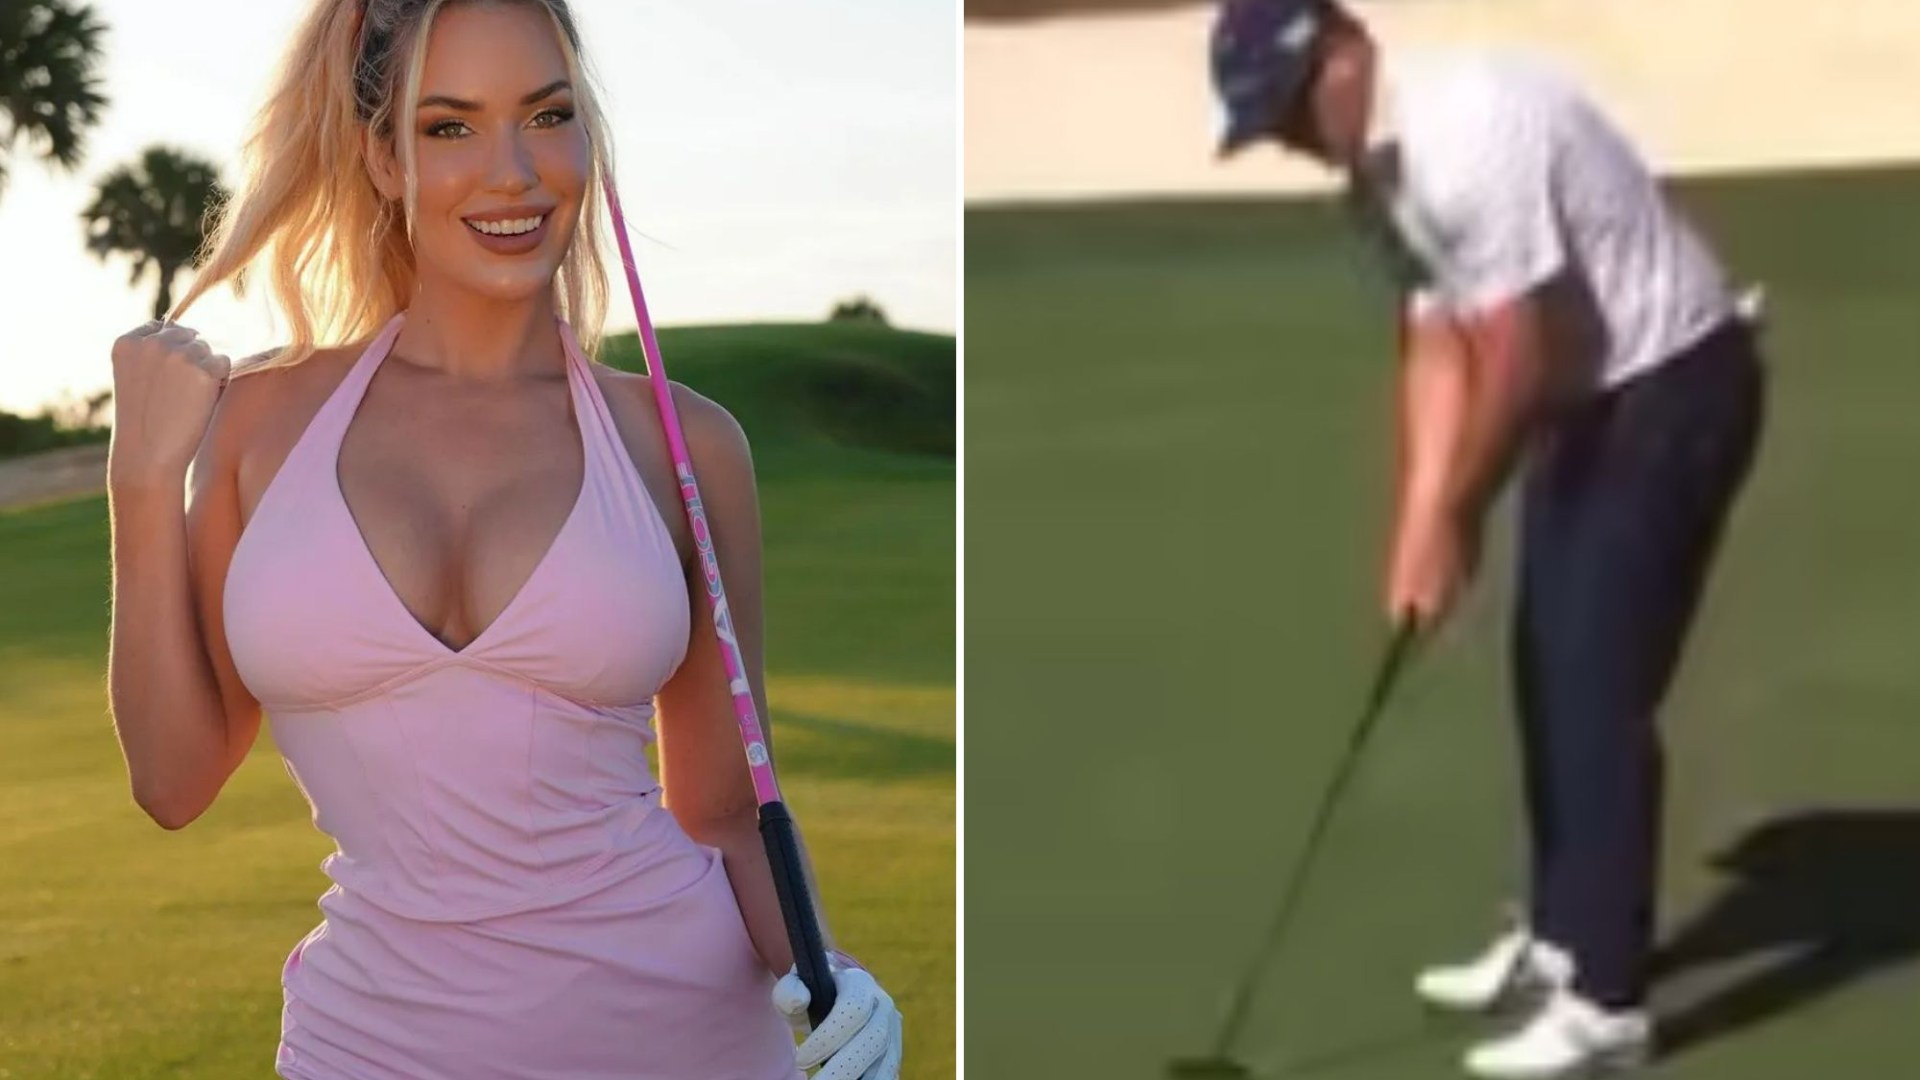 Paige Spiranac slams Zach Johnson with ‘baby poop’ tweet after his foul-mouthed blast at Masters fans [Video]